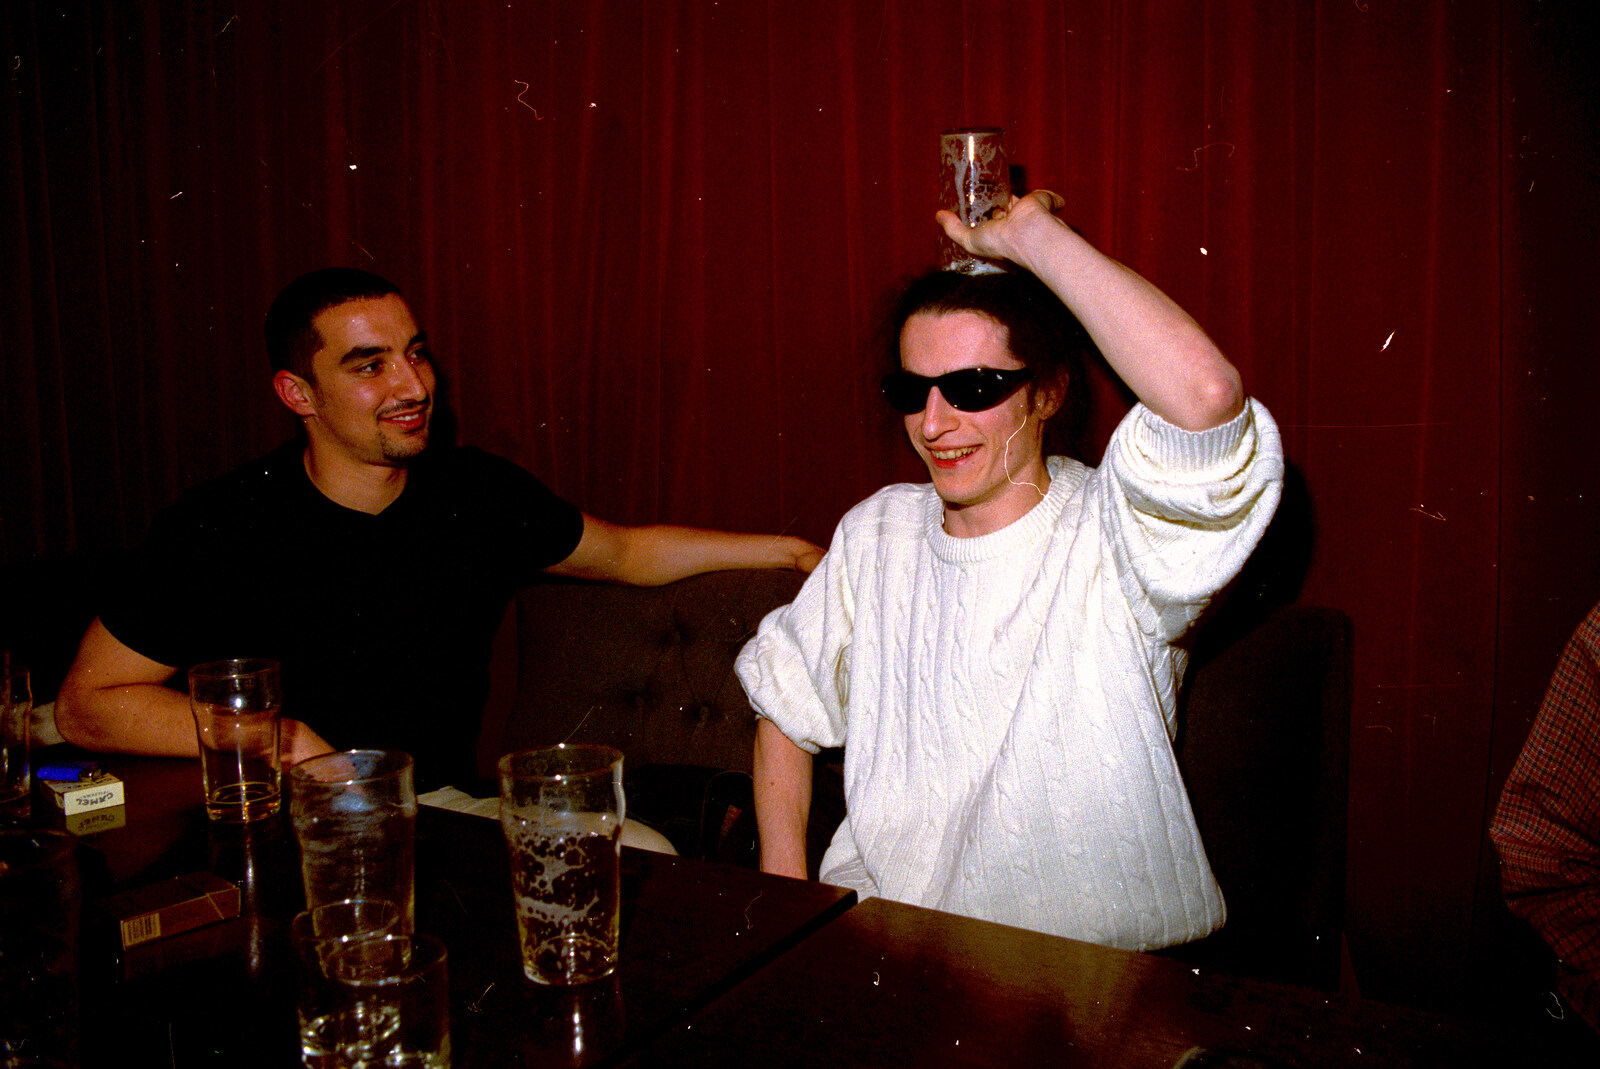 Frenchie puts a glass on the head from CISU Plays Cardinal's Hat in the SCC Social Club, Ipswich, Suffolk - 3rd August 1997